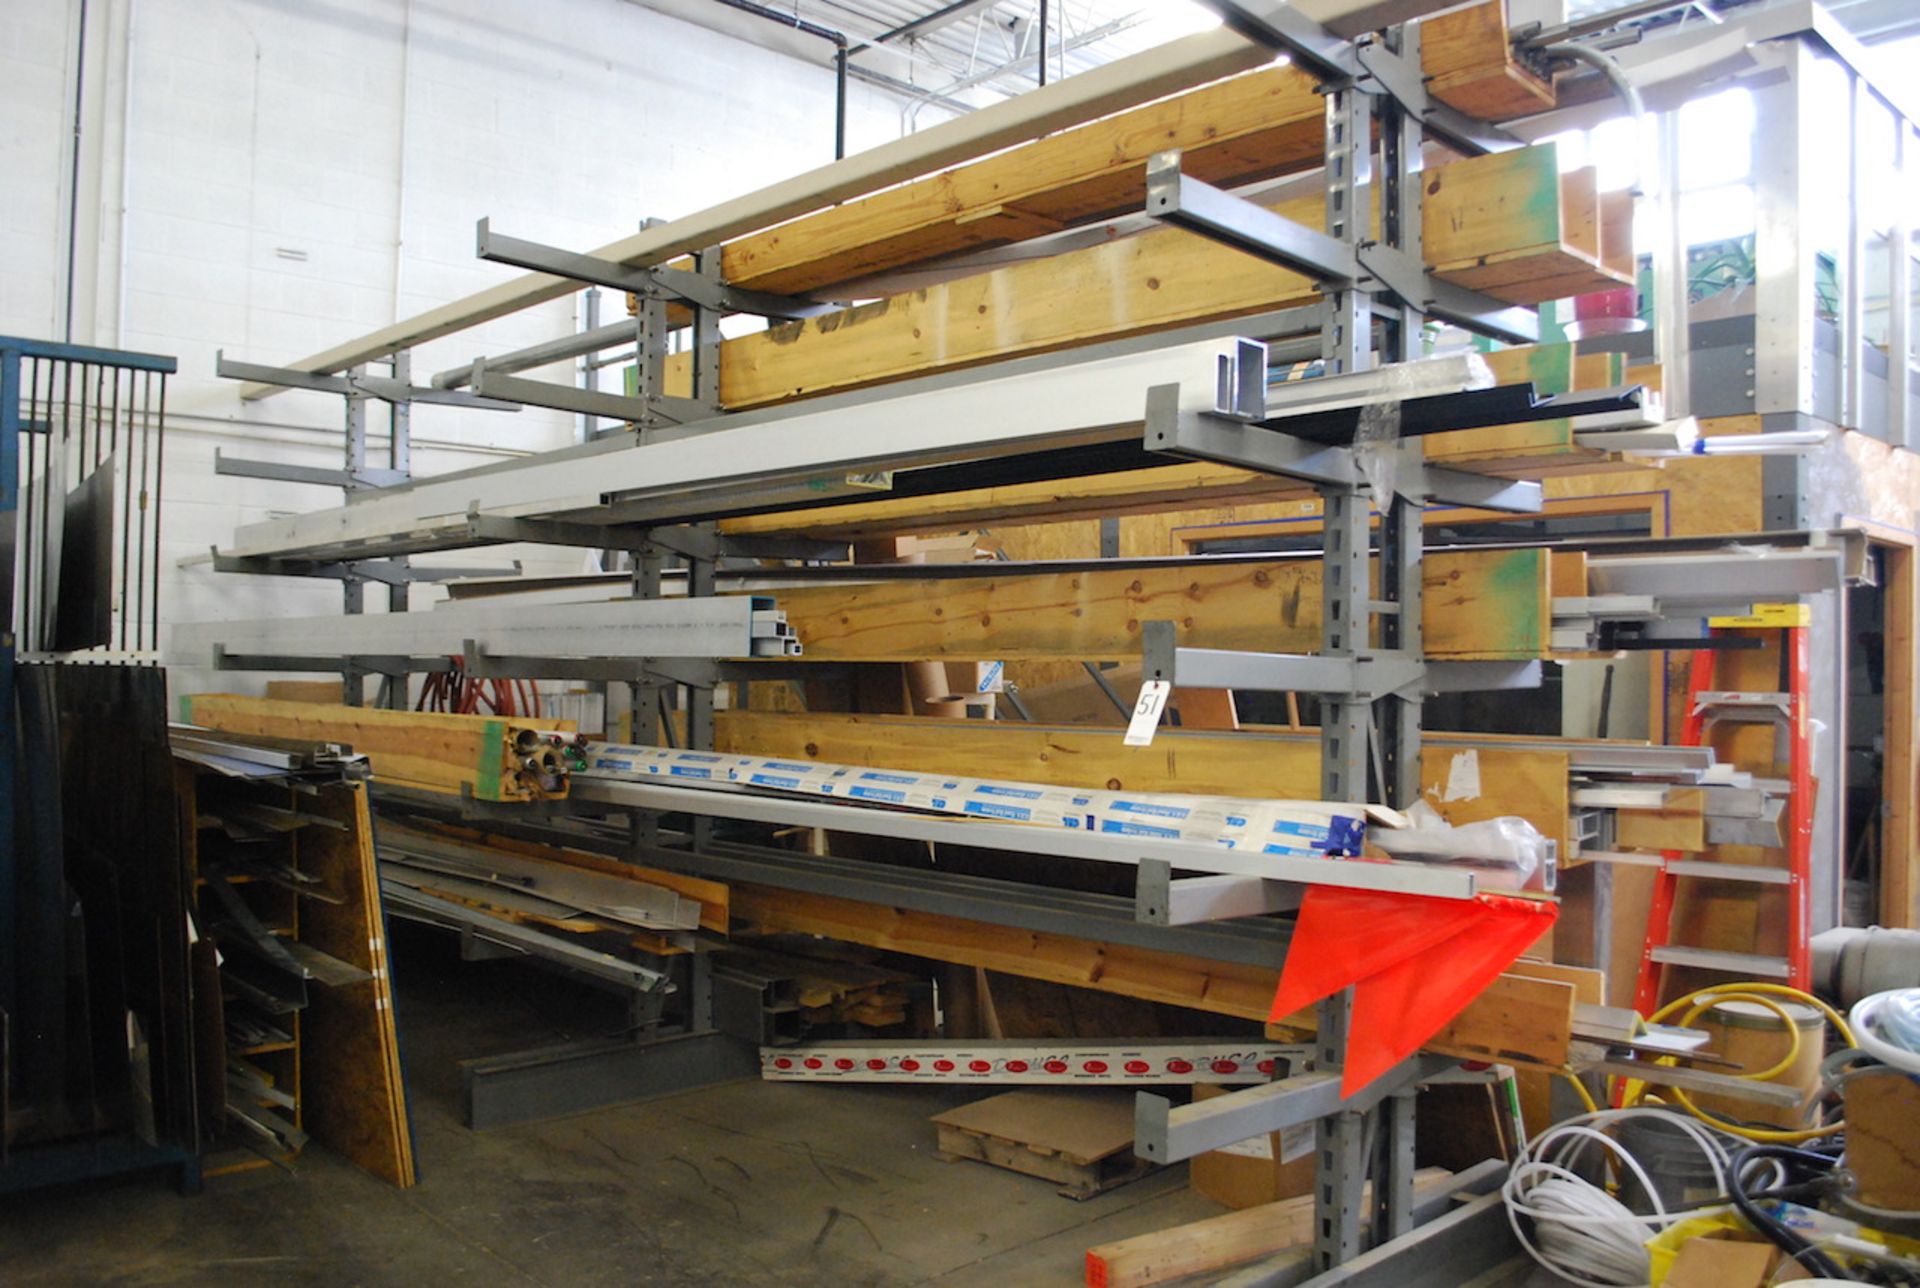 DOUBLE SIDED ADJUSTABLE CANTILEVER RACK: 10' H X 18' 9-1/2" L (APPROX.) (NO CONTENTS)